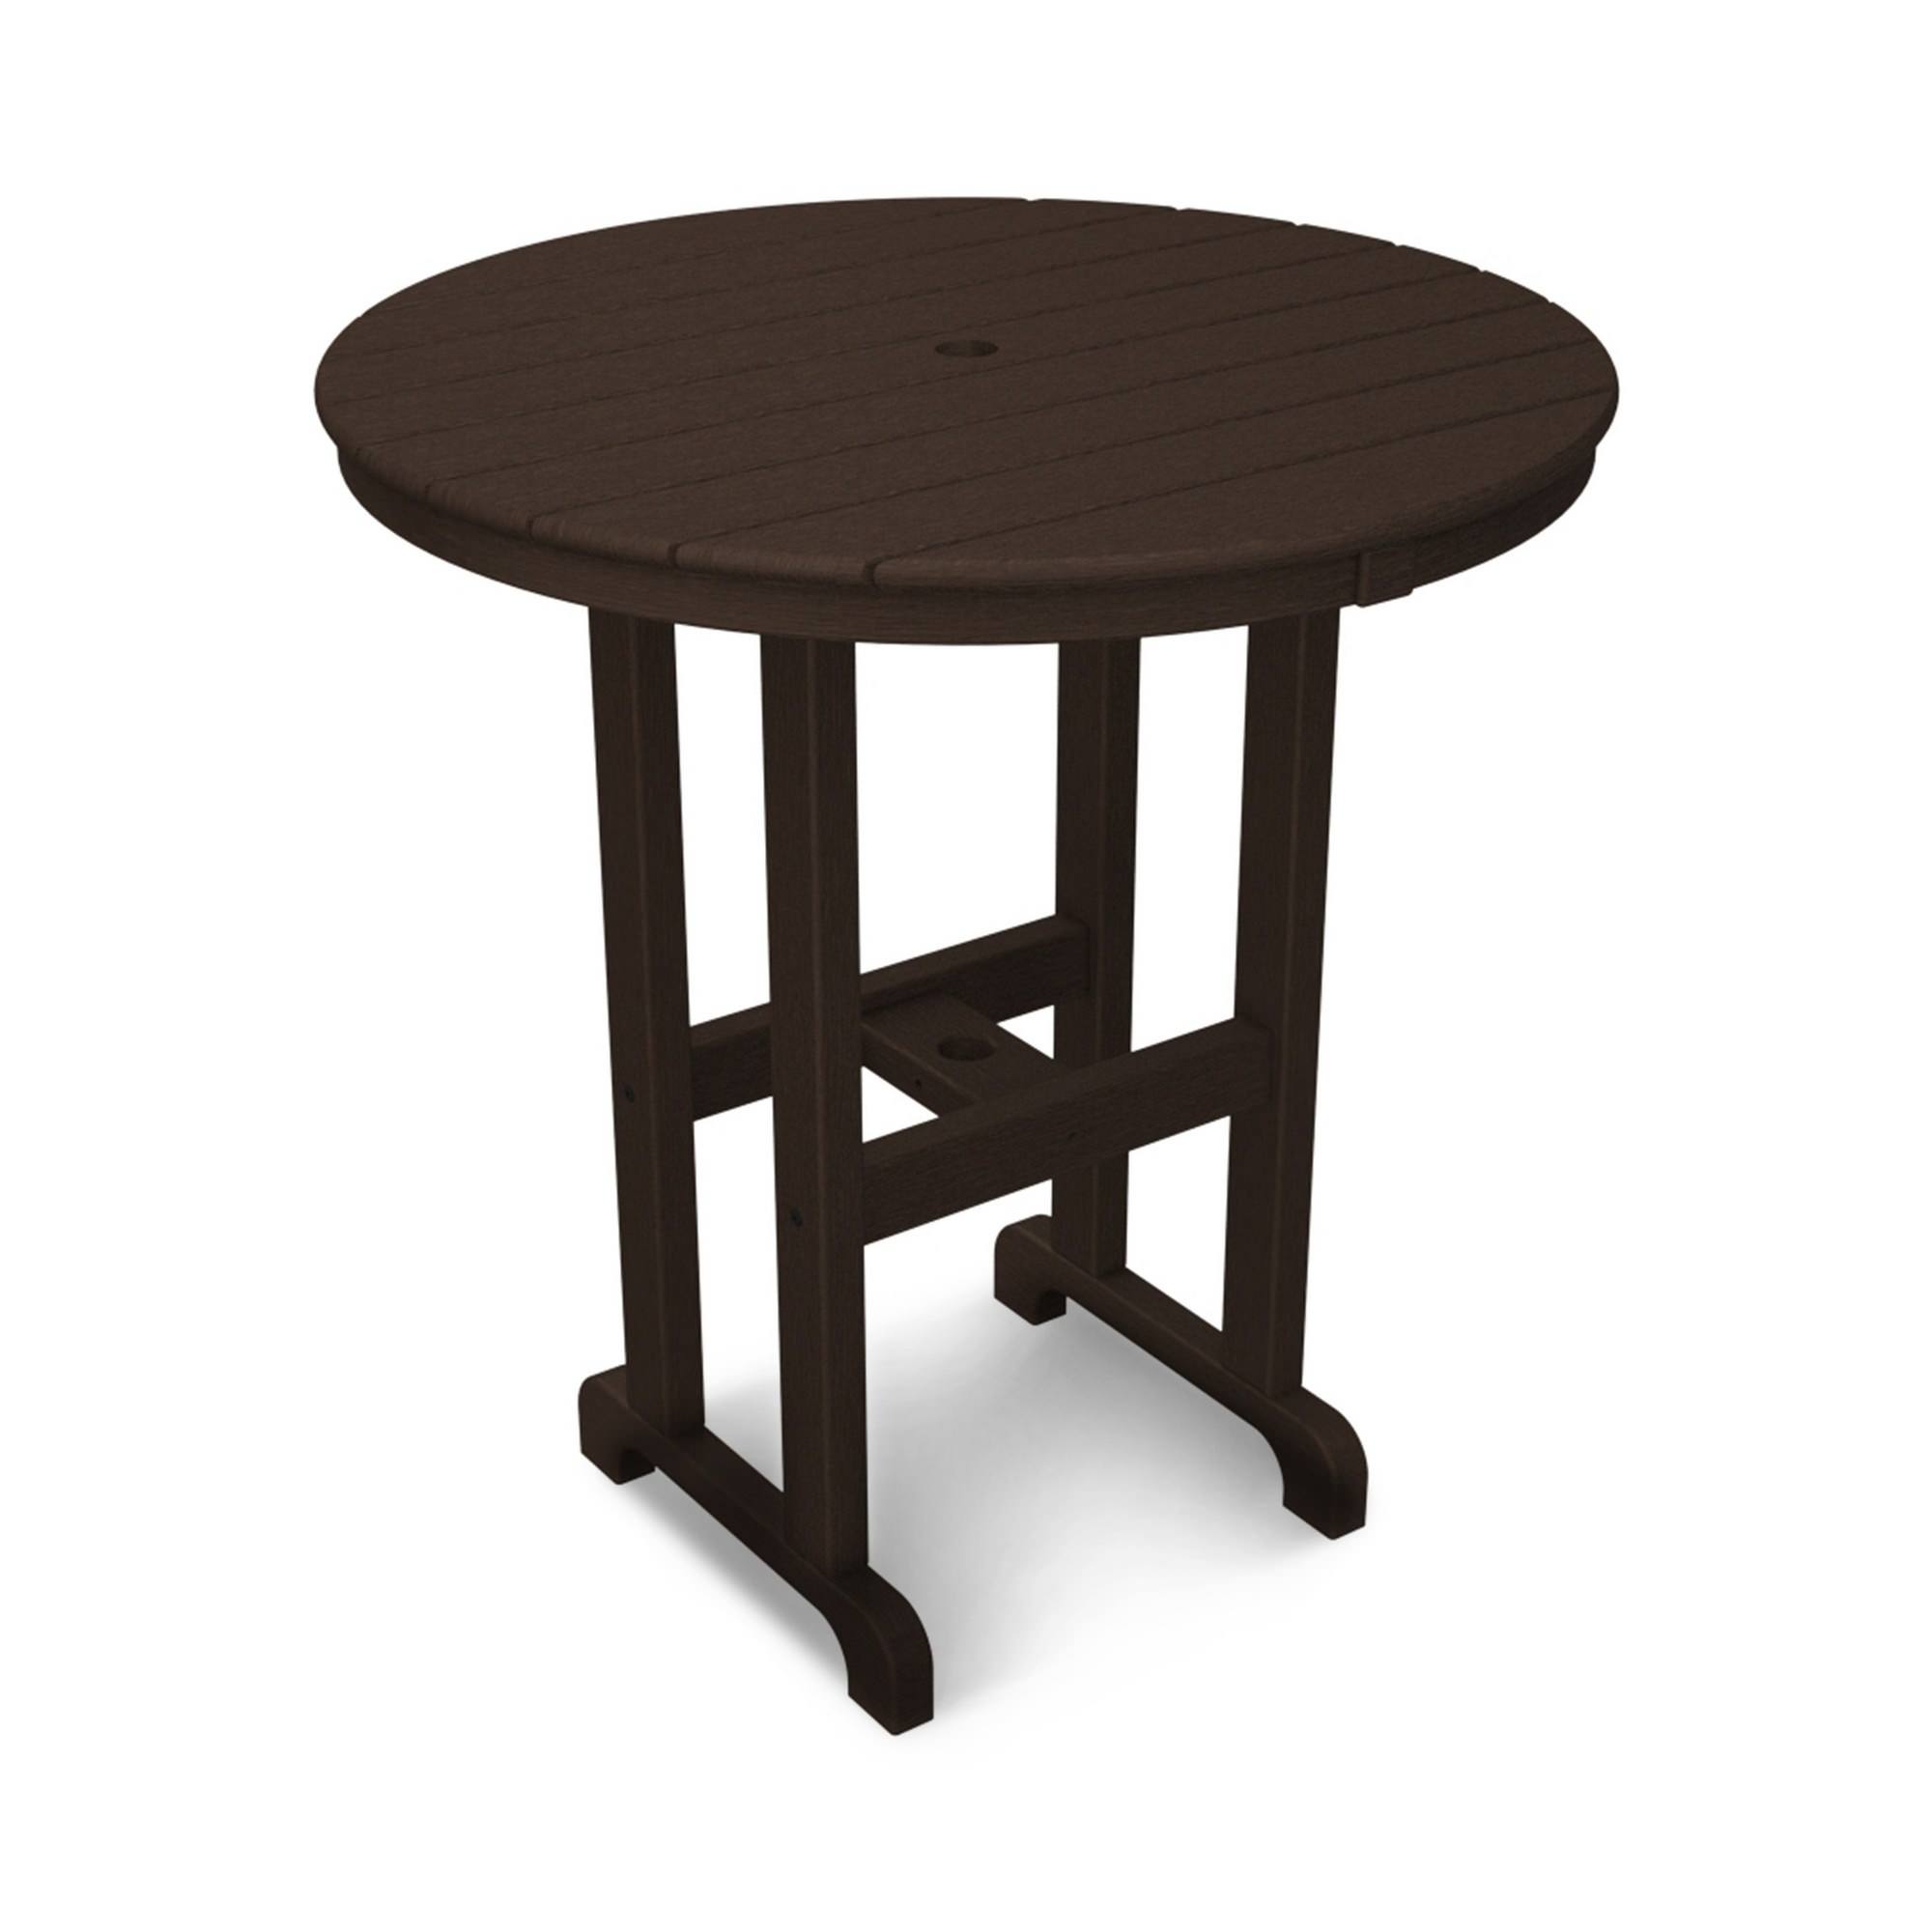 Polywood La Casa Cafe Round 36 Inch Dining Table